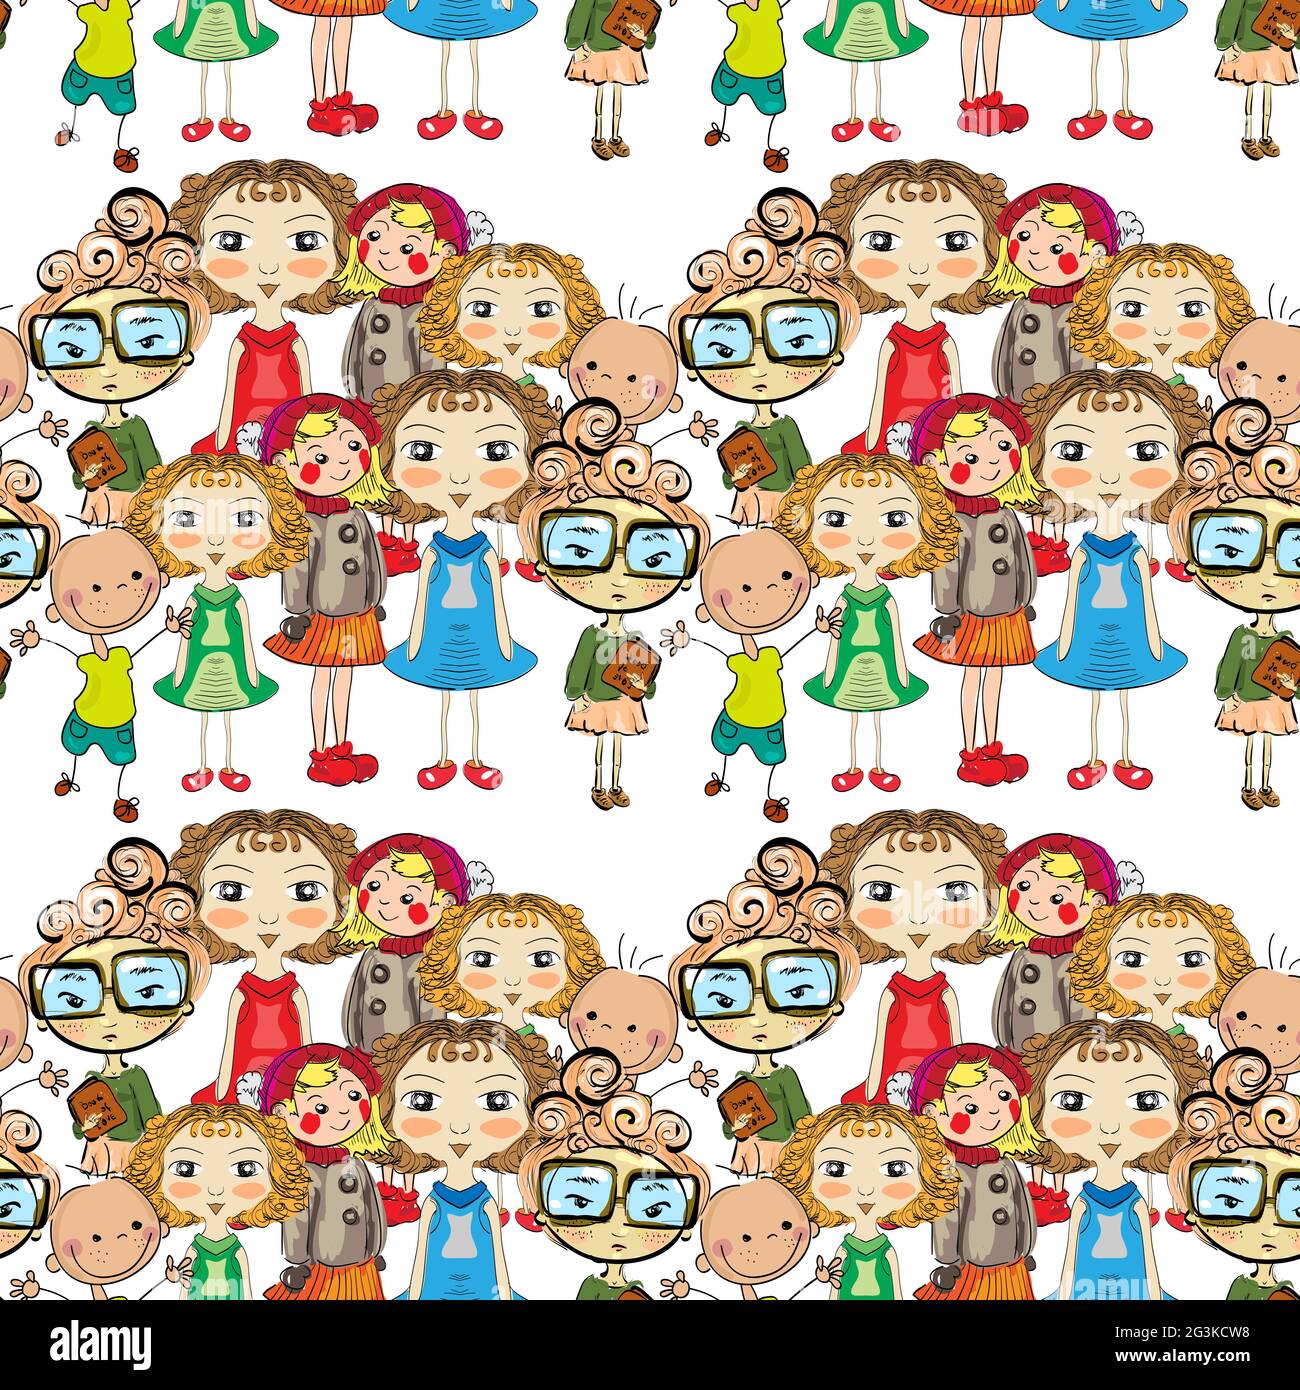 Illustration of hand drawn seamless pattern with children Stock Photo